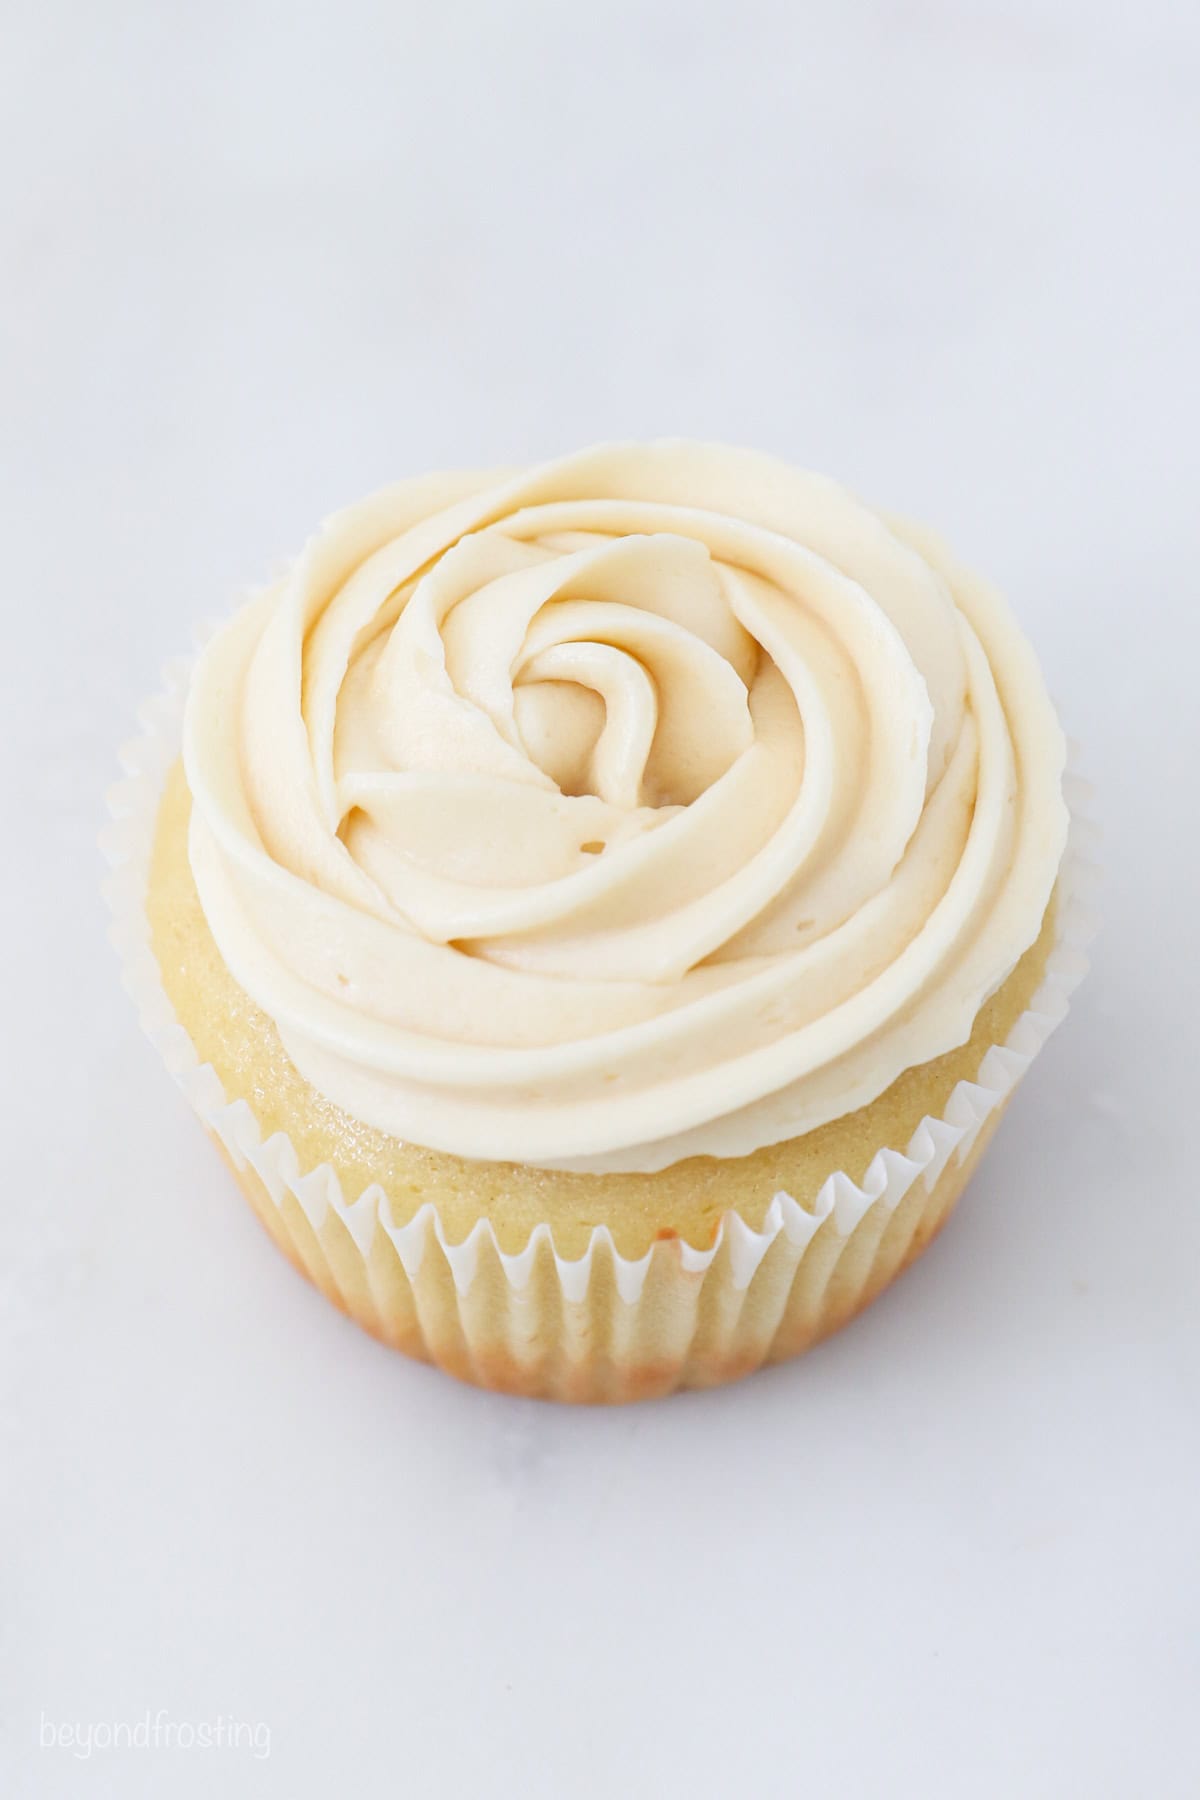 A cupcake frosted with a vanilla frosting swirl.